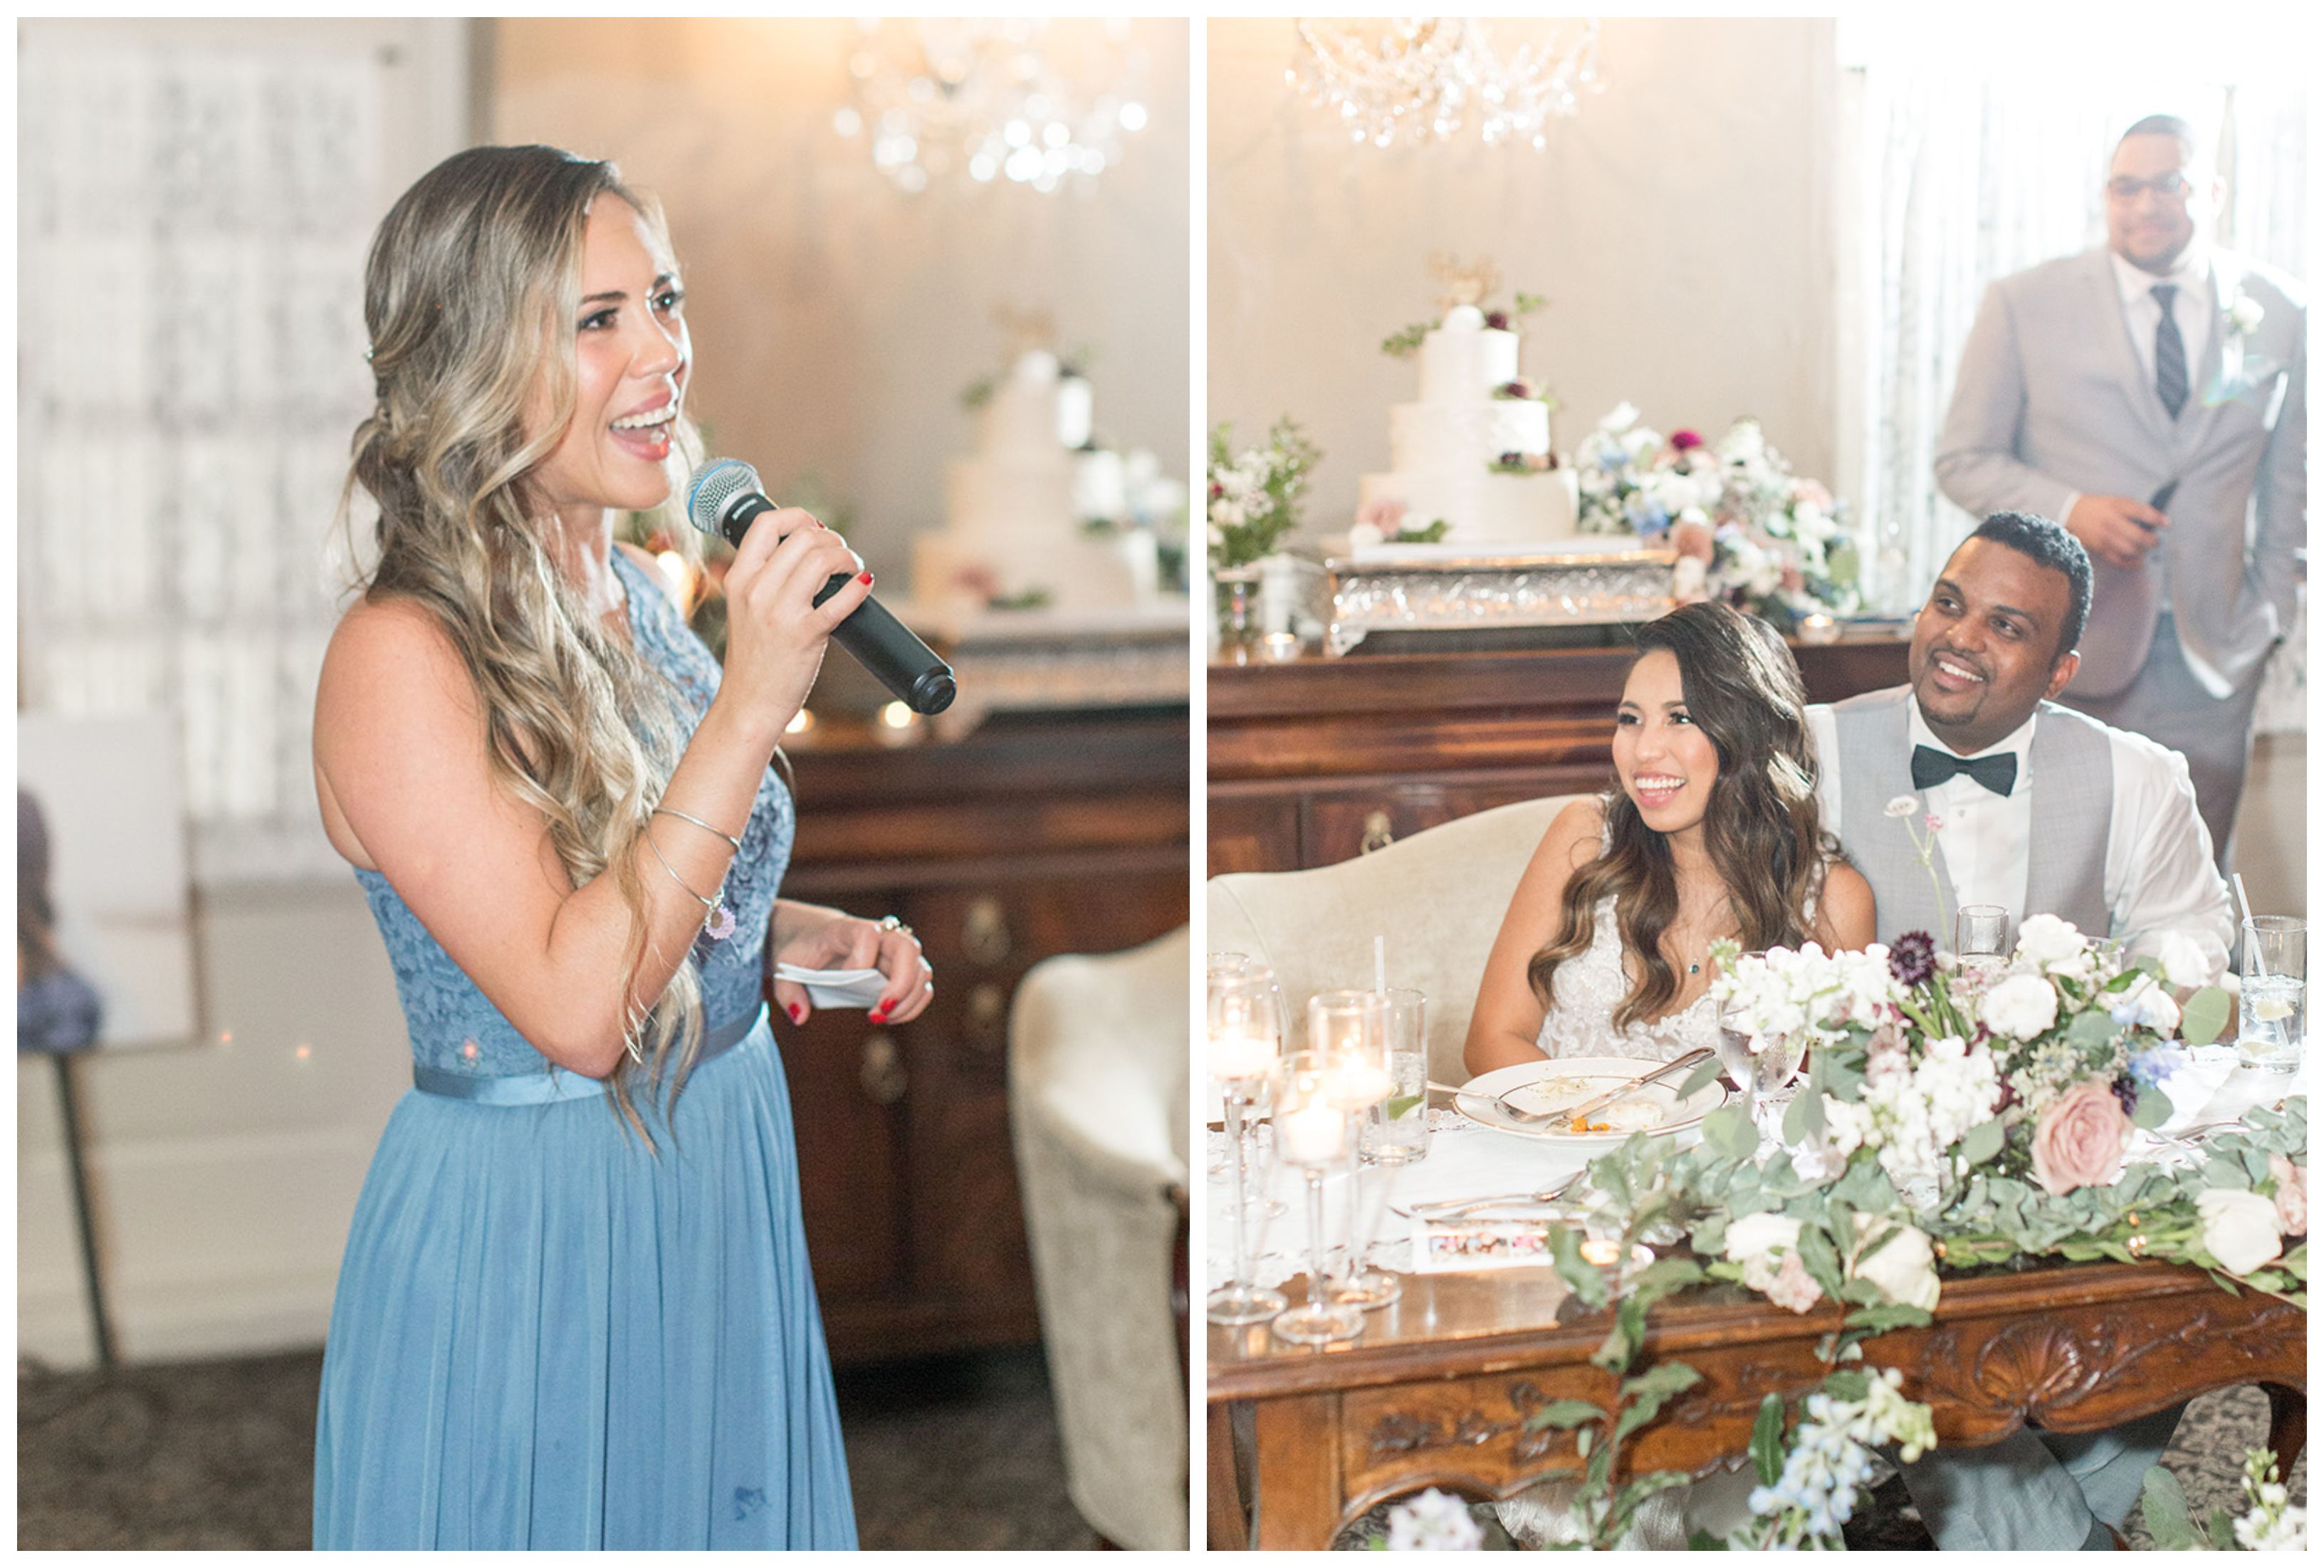 Maid of honor gives a wedding toast